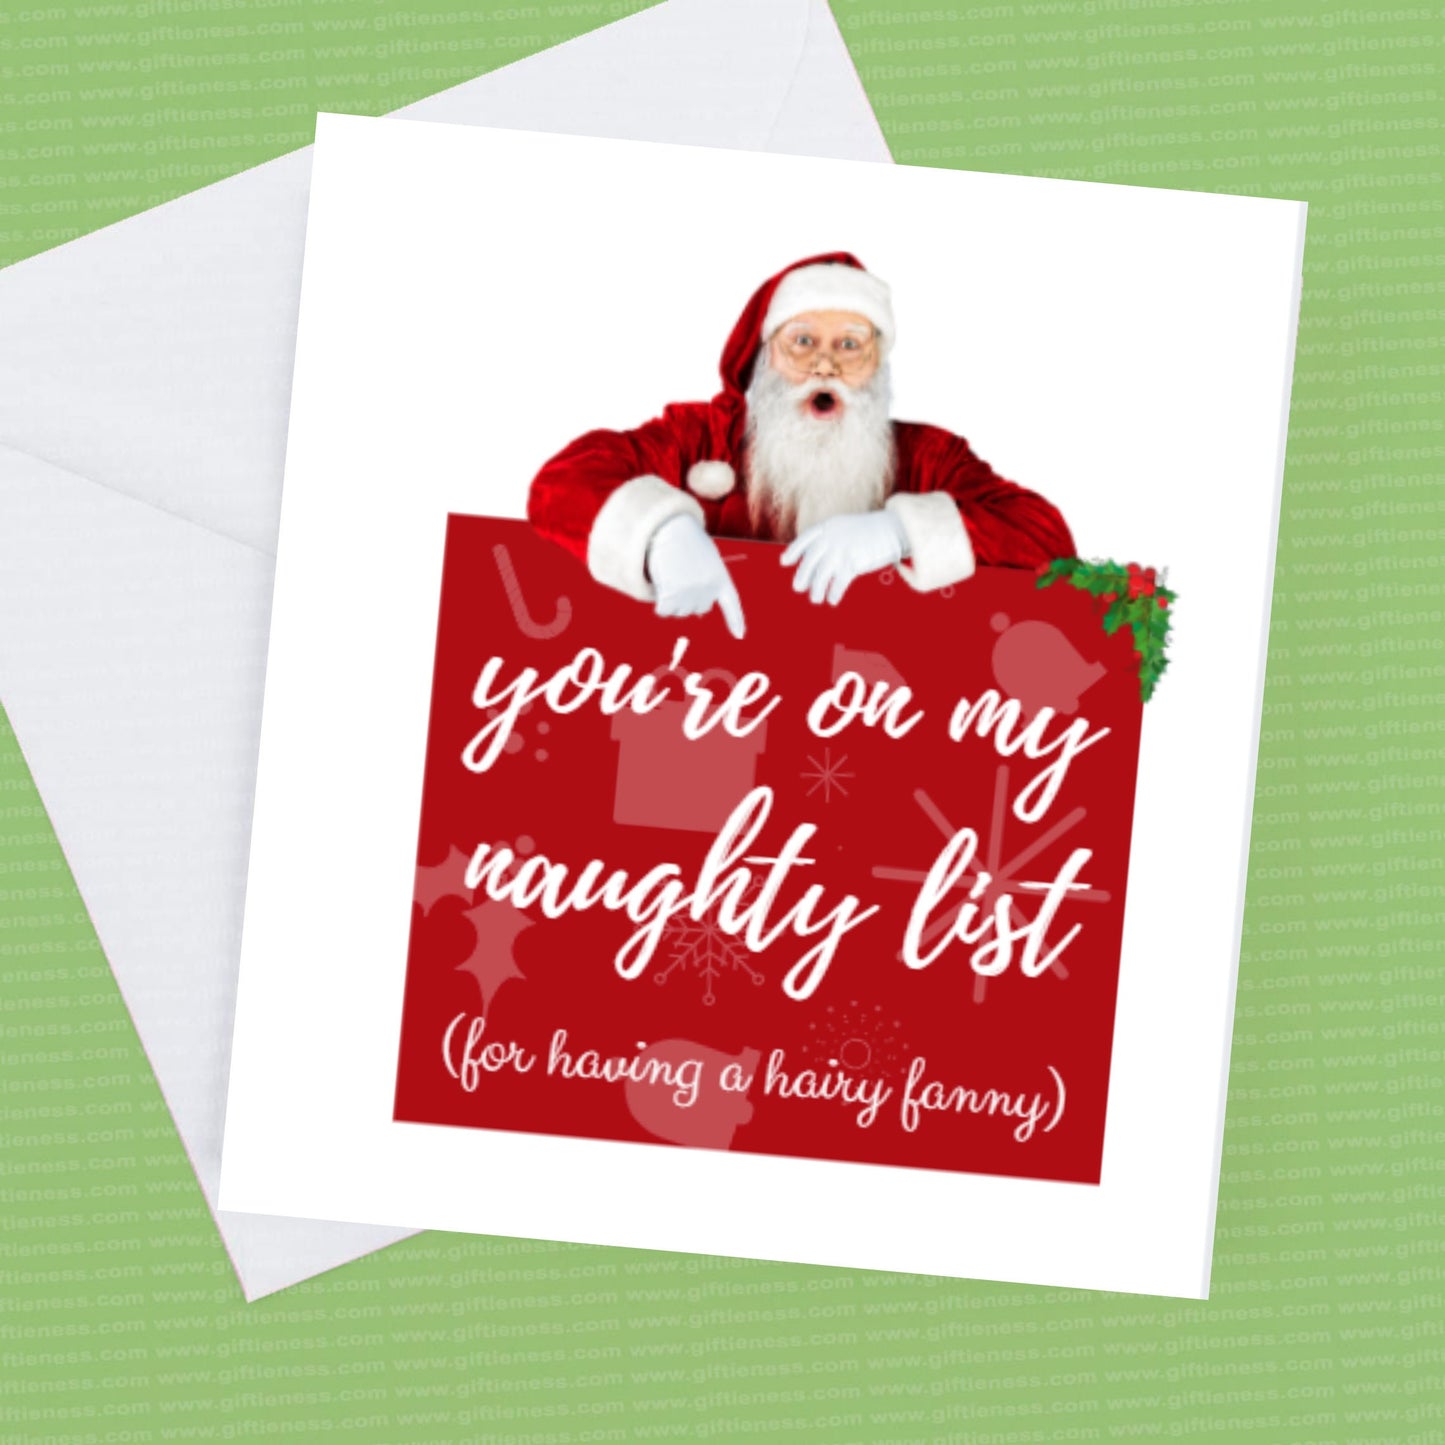 Christmas Card you're on my naughty list for having a hairy fanny